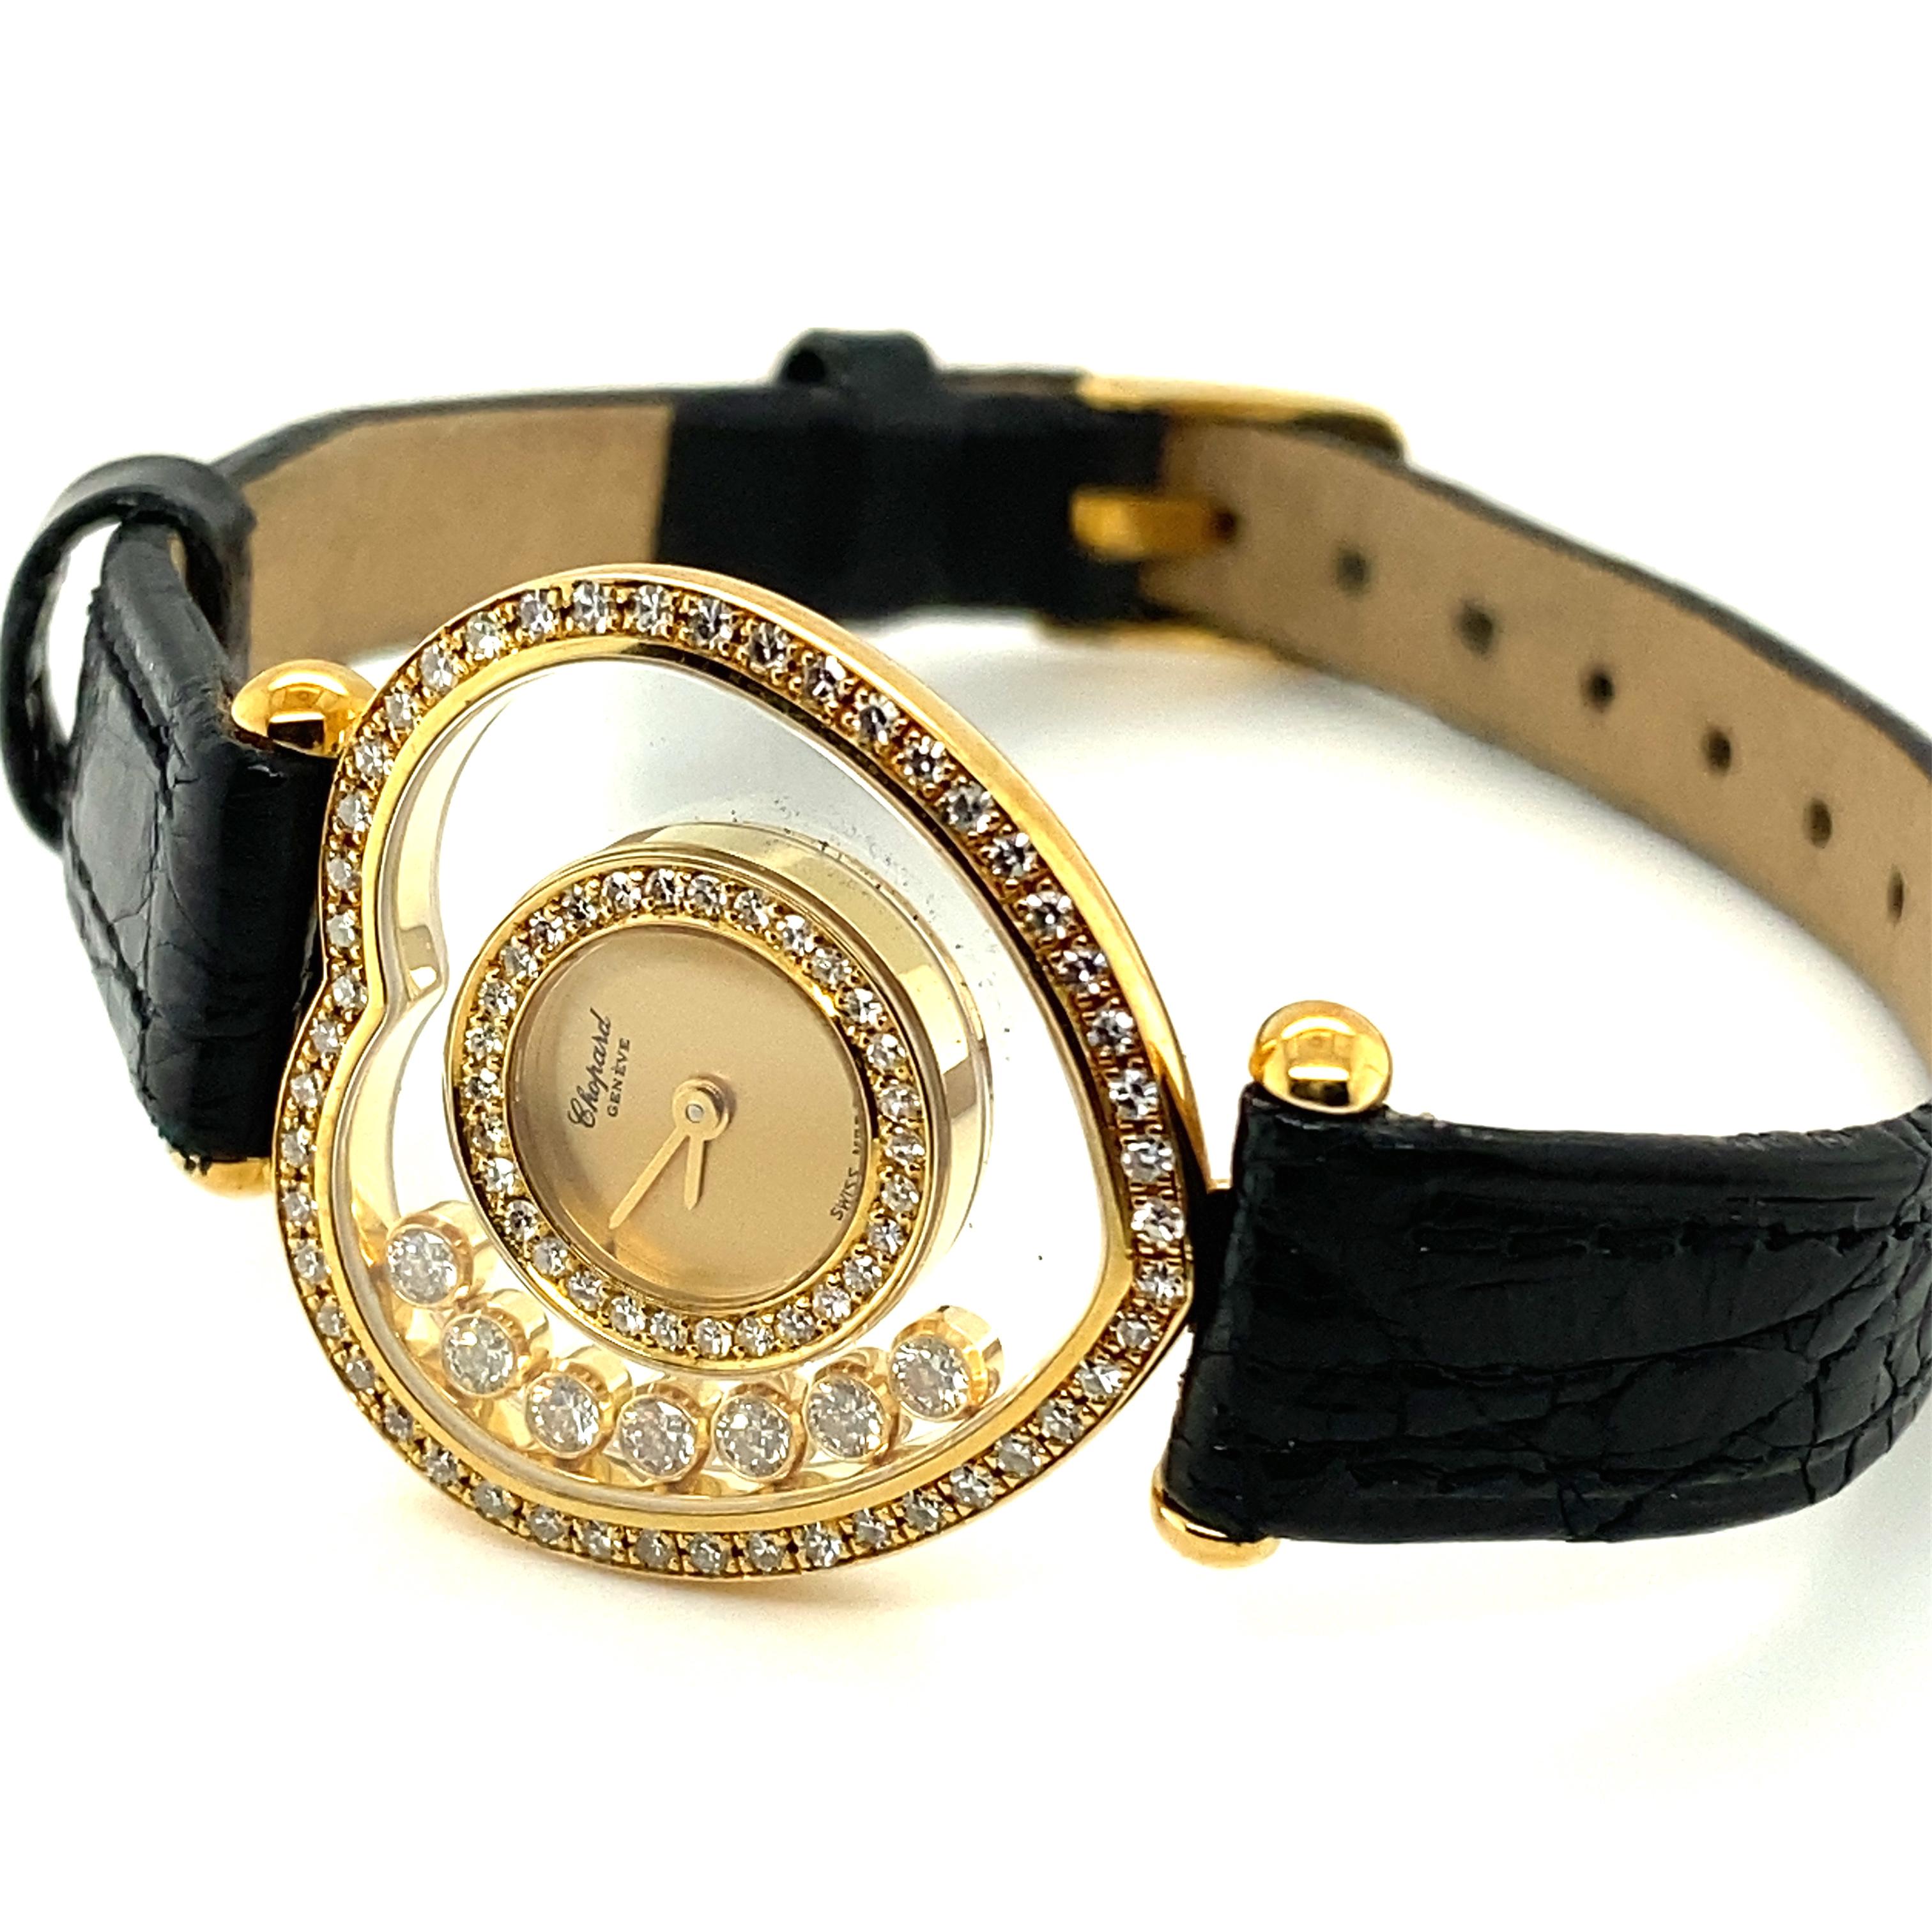 Chopard Happy Diamond Heart Ladies' Watch in 18 Karat Yellow Gold, Ref. 20/4516 In Good Condition For Sale In Lucerne, CH